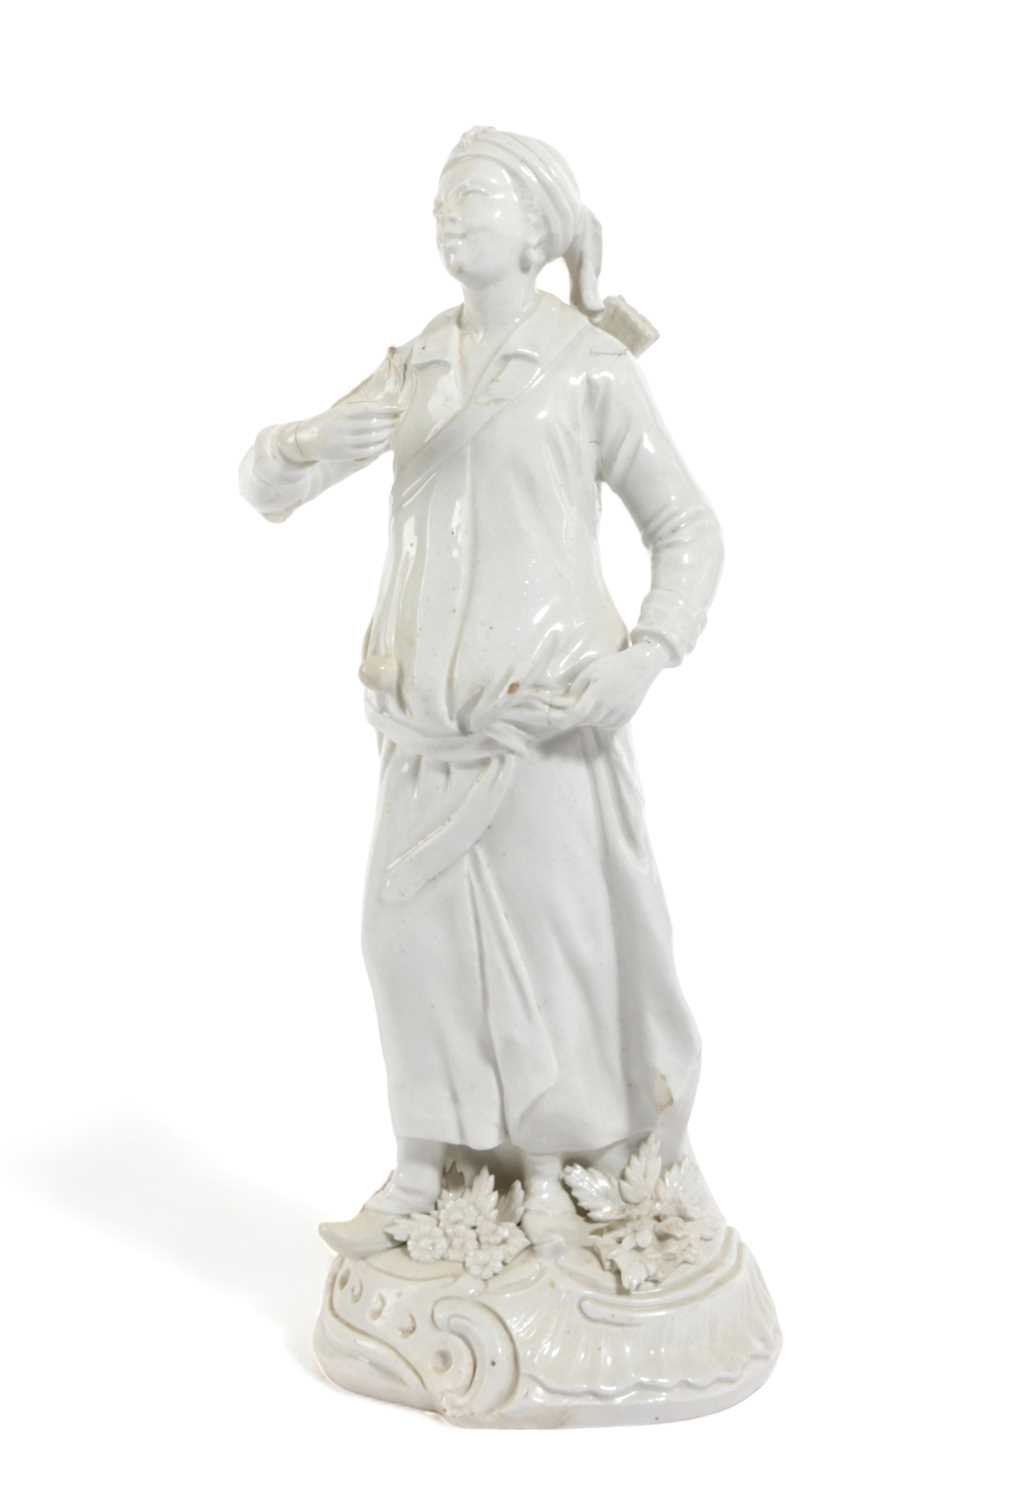 A WHITE-GLAZED DERBY PORCELAIN FIGURE OF THE ABYSSINIAN ARCHER C.1765 wearing a flowing robe with